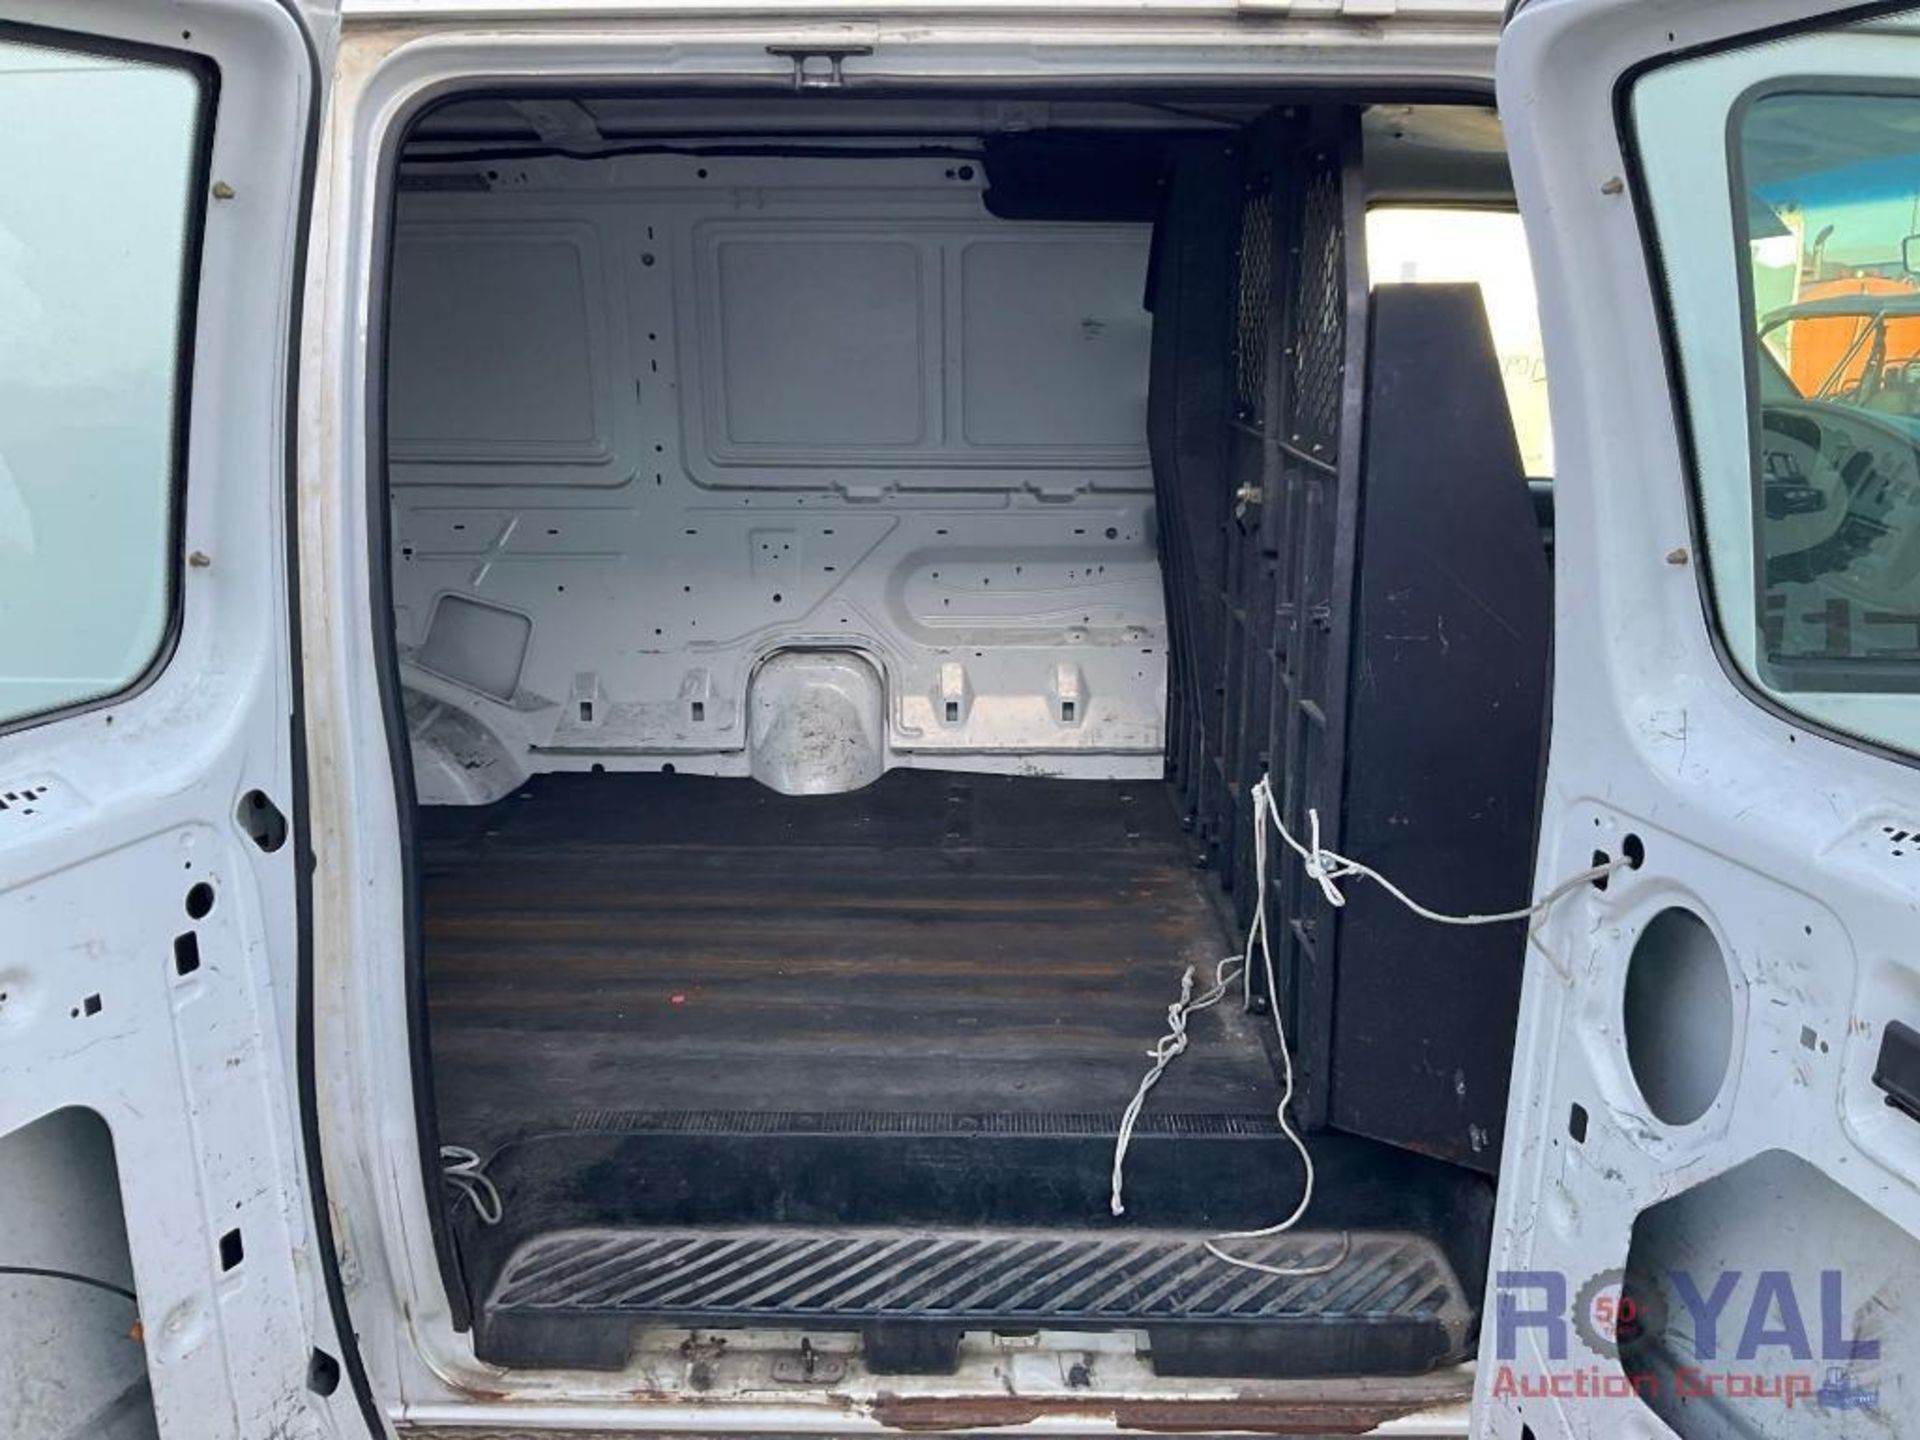 2006 Ford E350 Cargo Van - Image 28 of 36